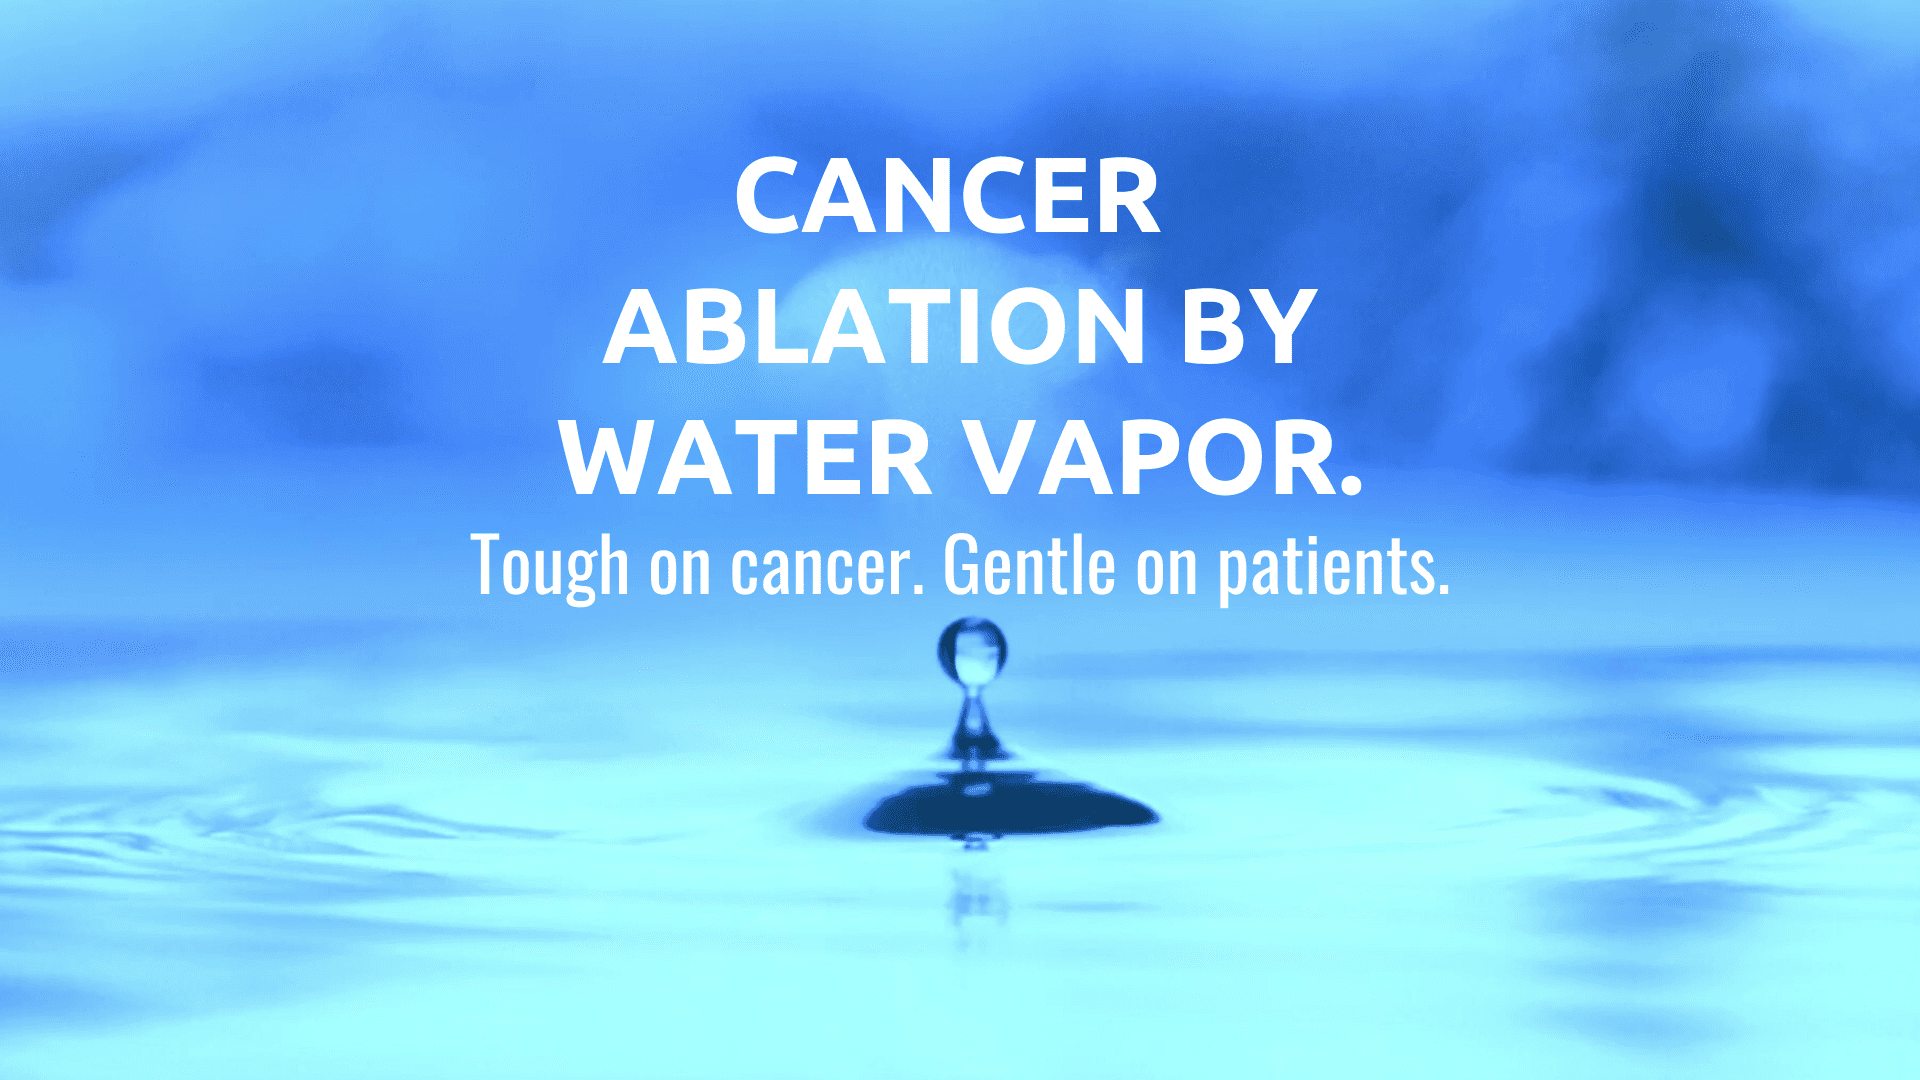 Cancer ablation by water vapor.